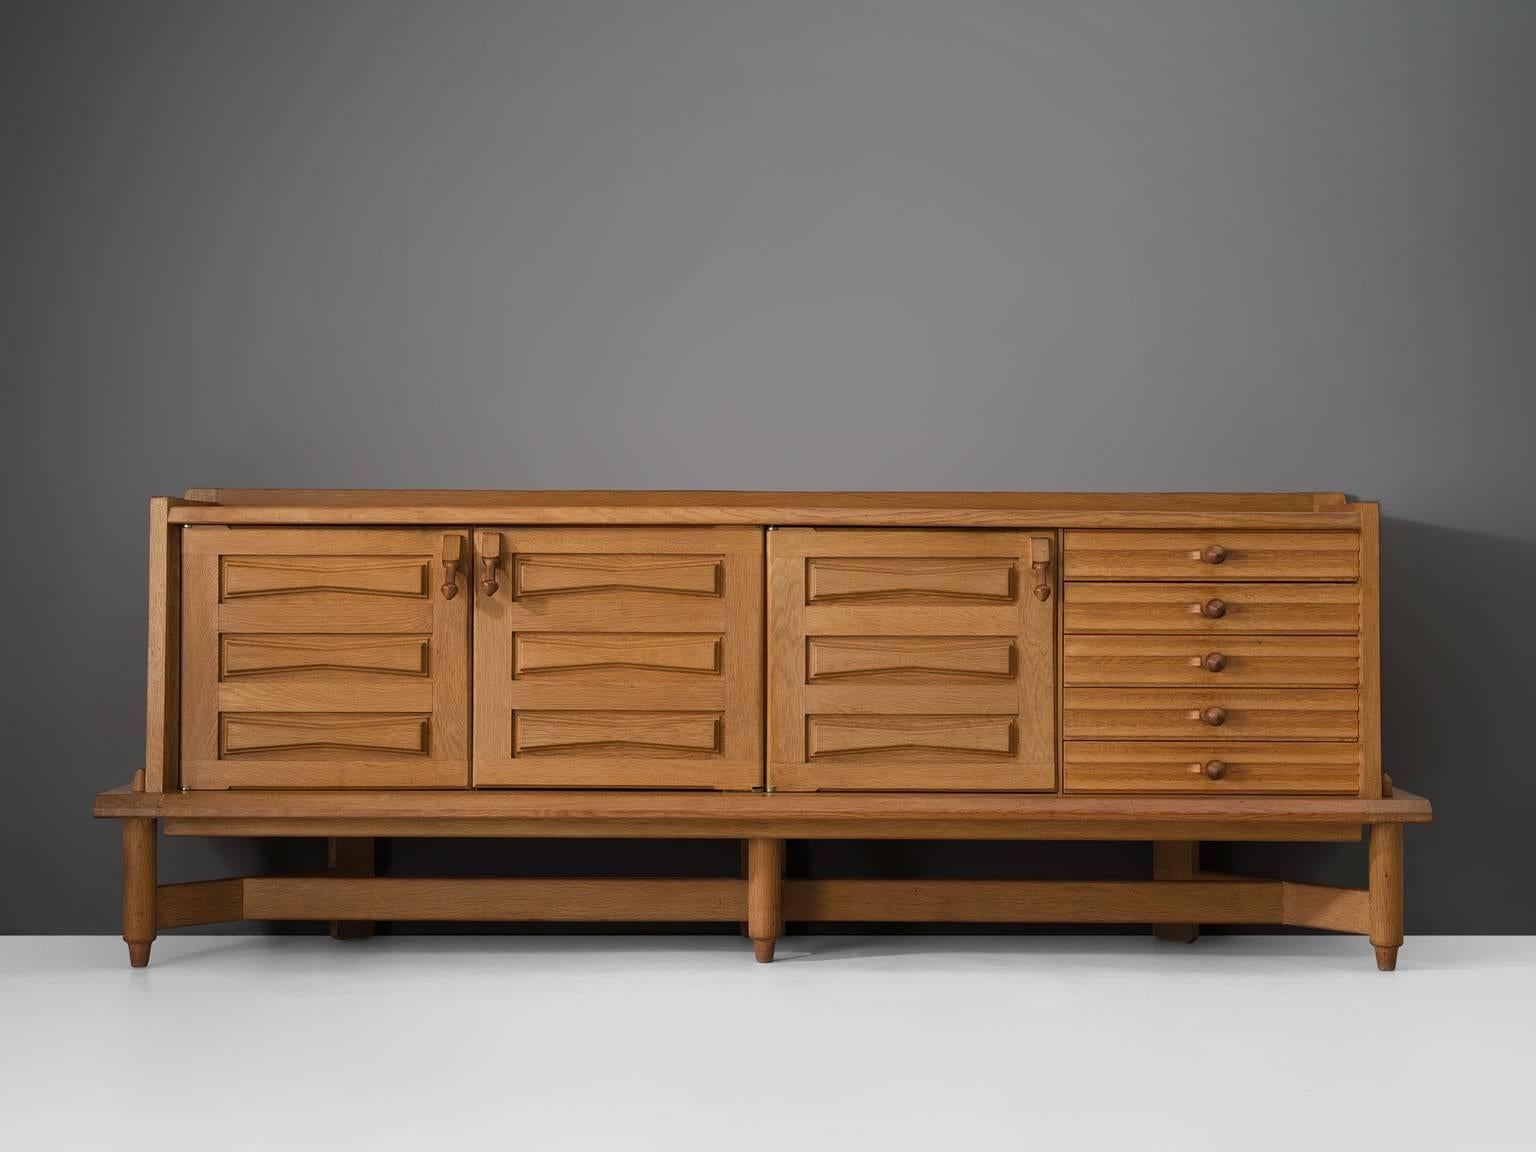 Credenza 'Saint-Ve´ran', in oak and ceramic, by Guillerme et Chambron for Votre Maison, France, 1960s. 

Characteristic sideboard in solid oak. This cabinet holds the characteristics of the French designer duo Jacques Chambron (1914-2001) and